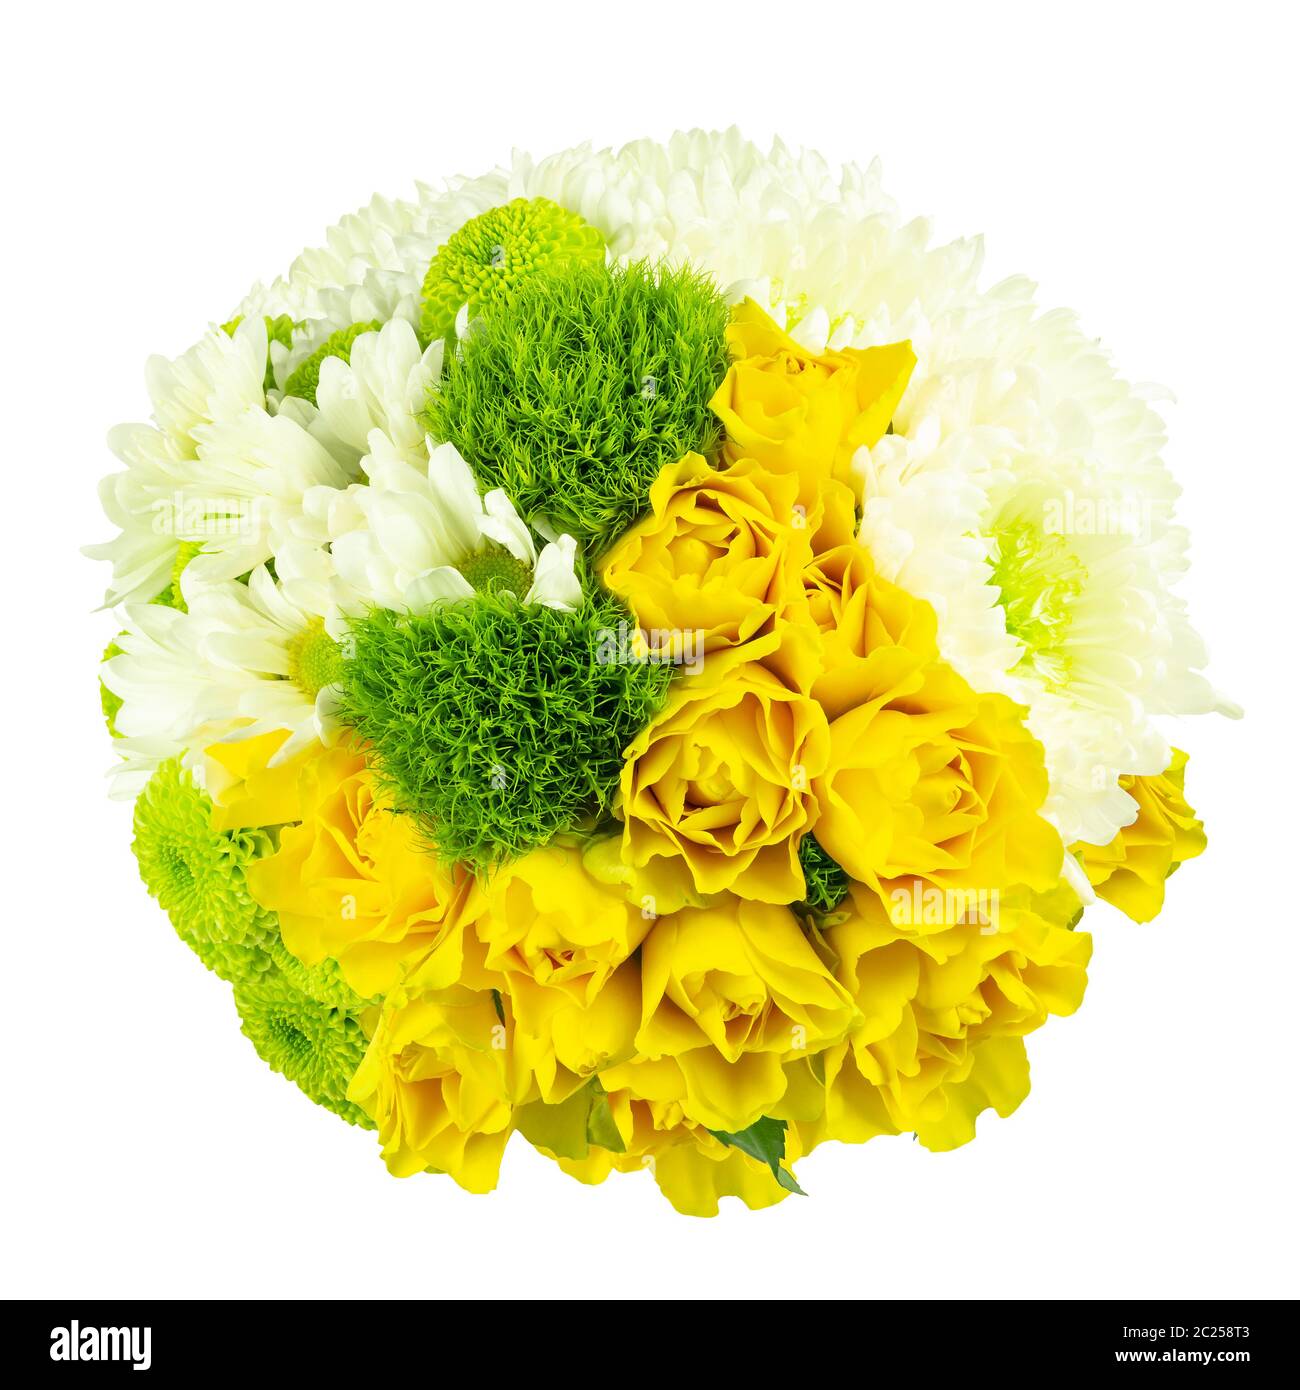 Bird's eye view of round bouquet with fresh cut flowers isolated on white. Arrangement with yellow, white and green fresh cut flowers Stock Photo